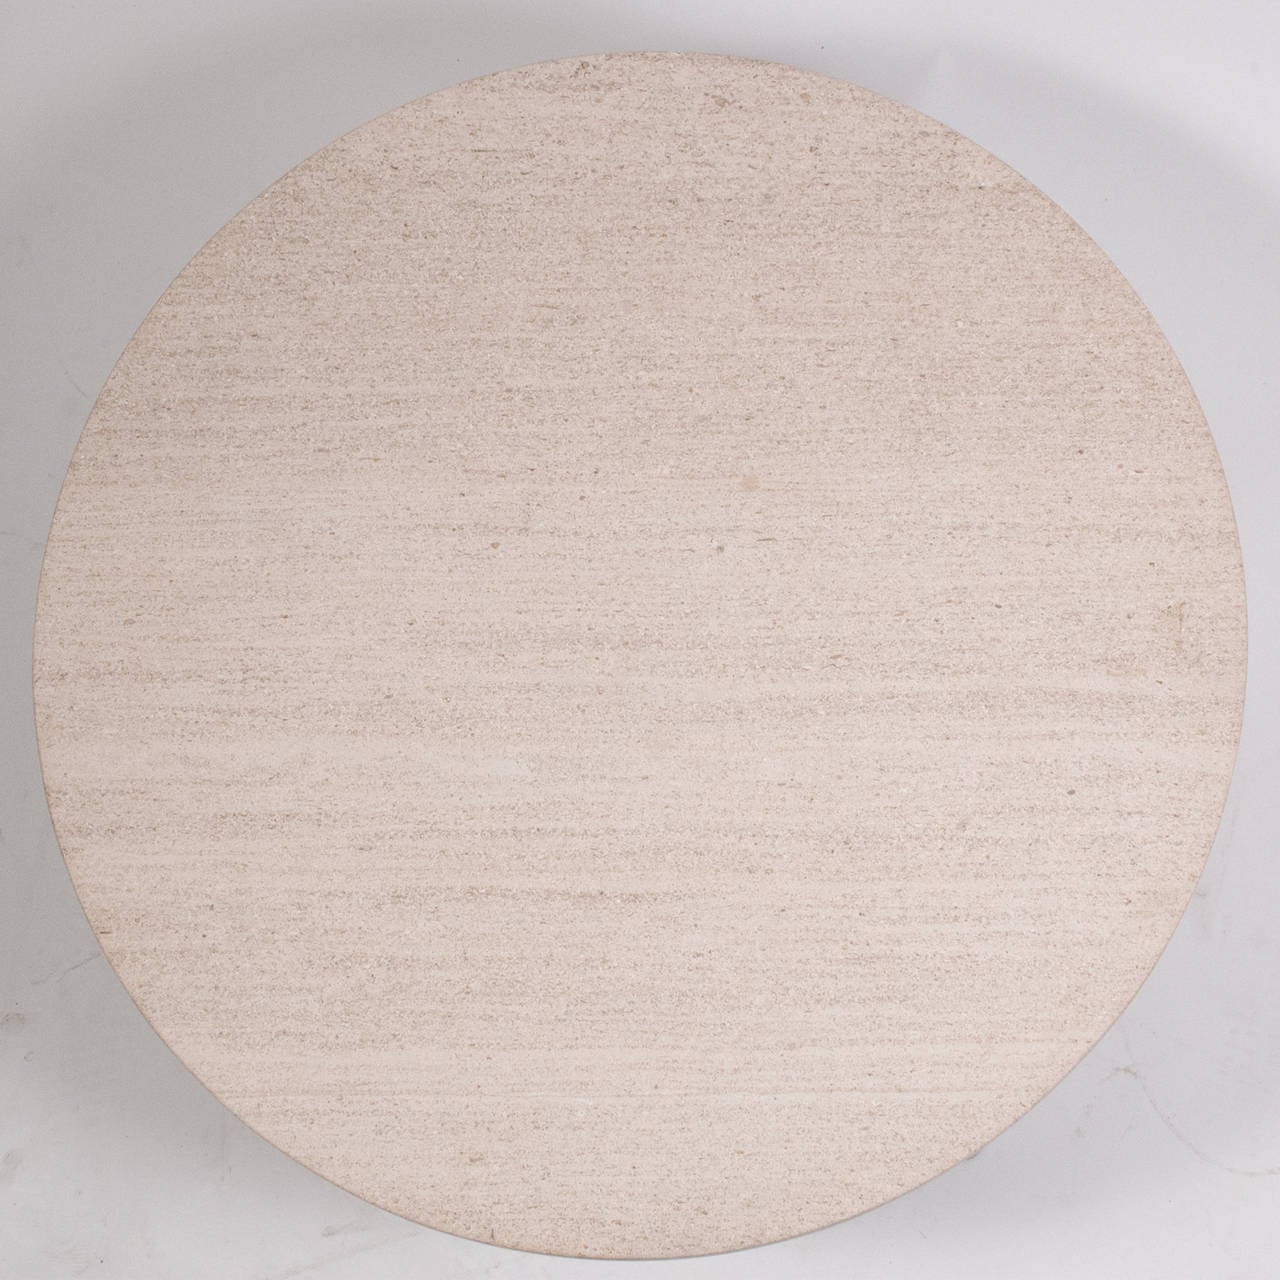 Walnut stain solid maple round coffee table with travertine top, label under.